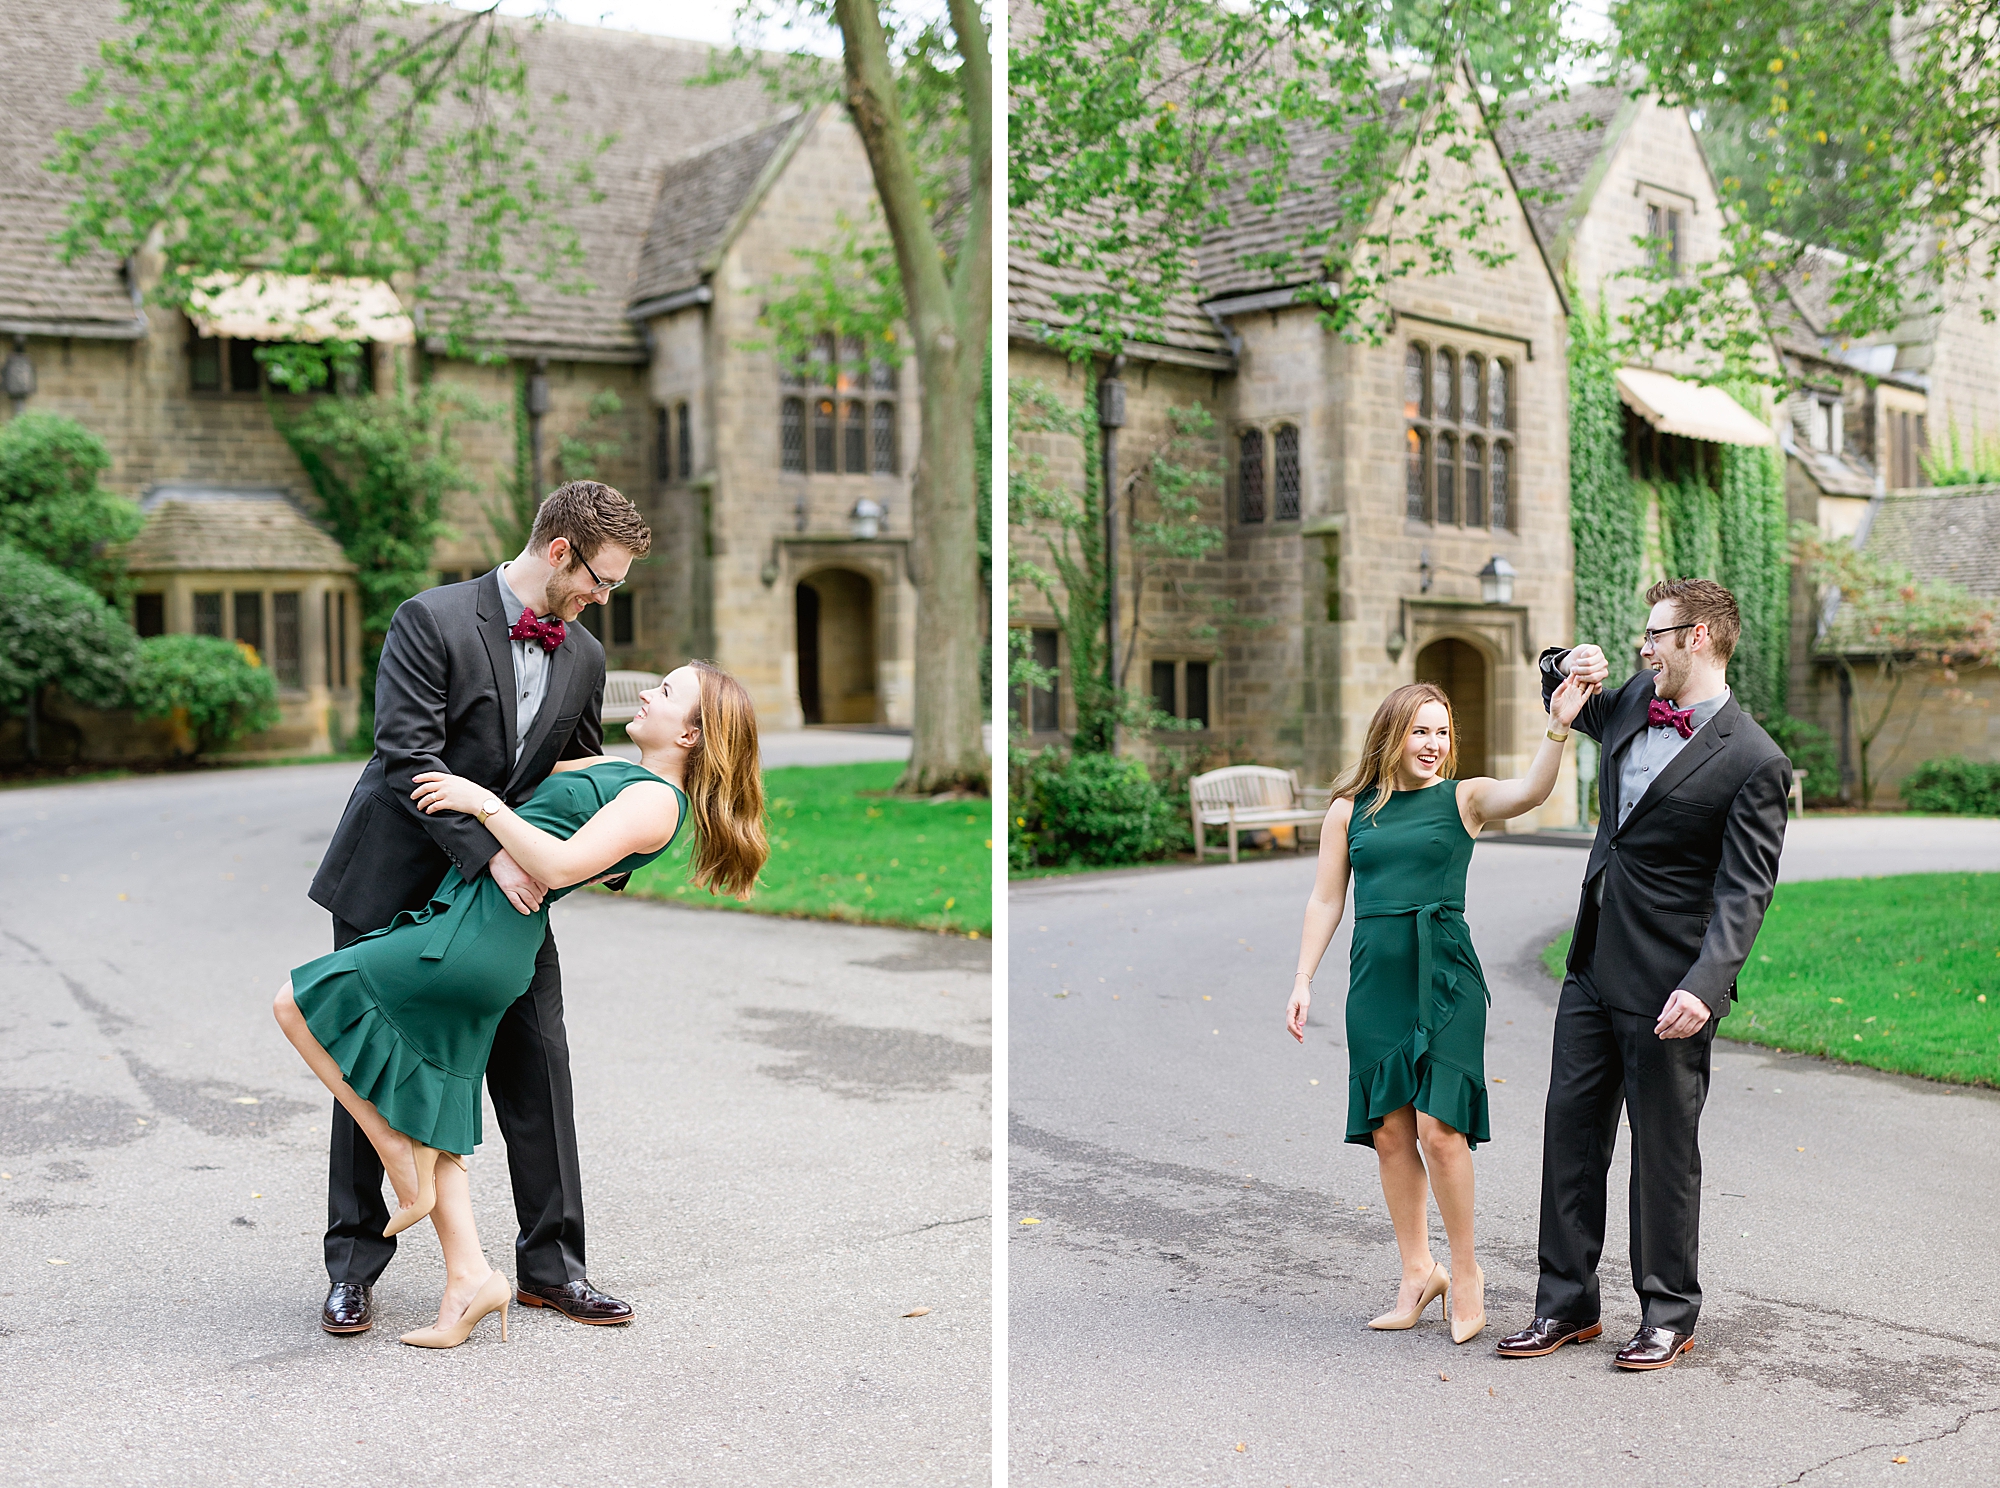 Twirl pose couple engagement session | Brianne Rochelle Photography